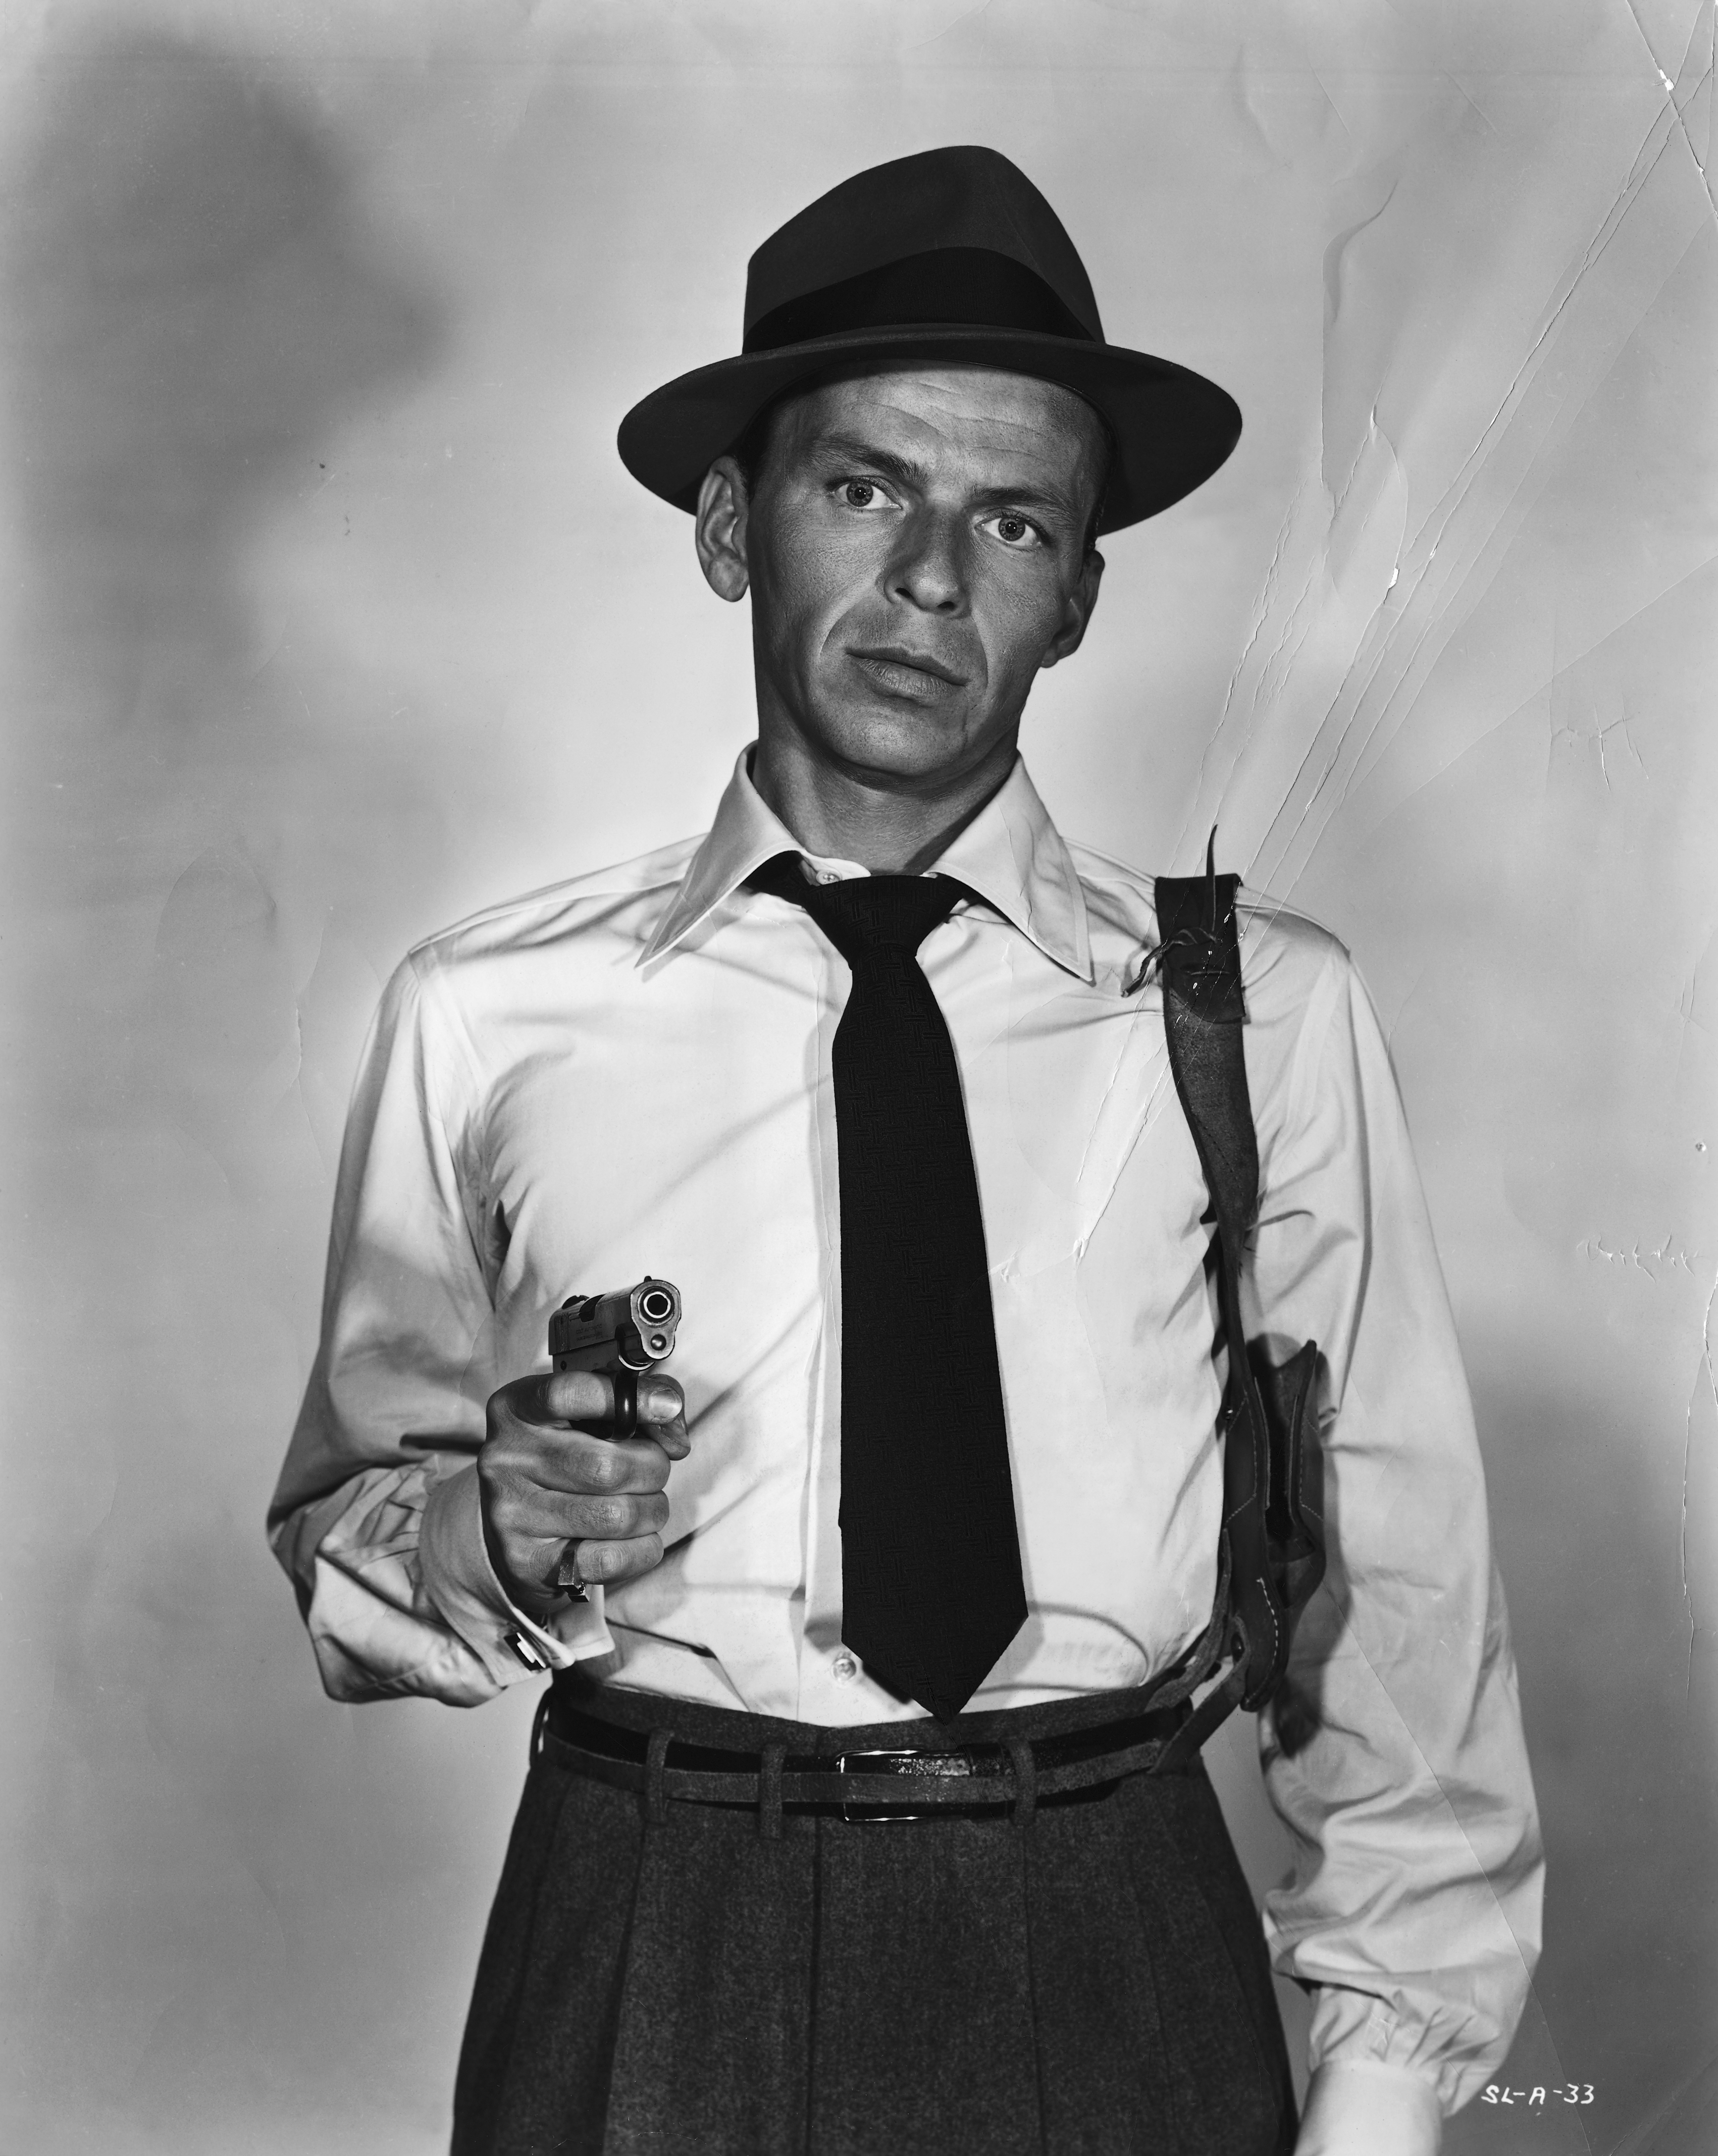 Frank Sinatra as John Baron in the film "Suddenly" in 1954 | Source: Getty Images